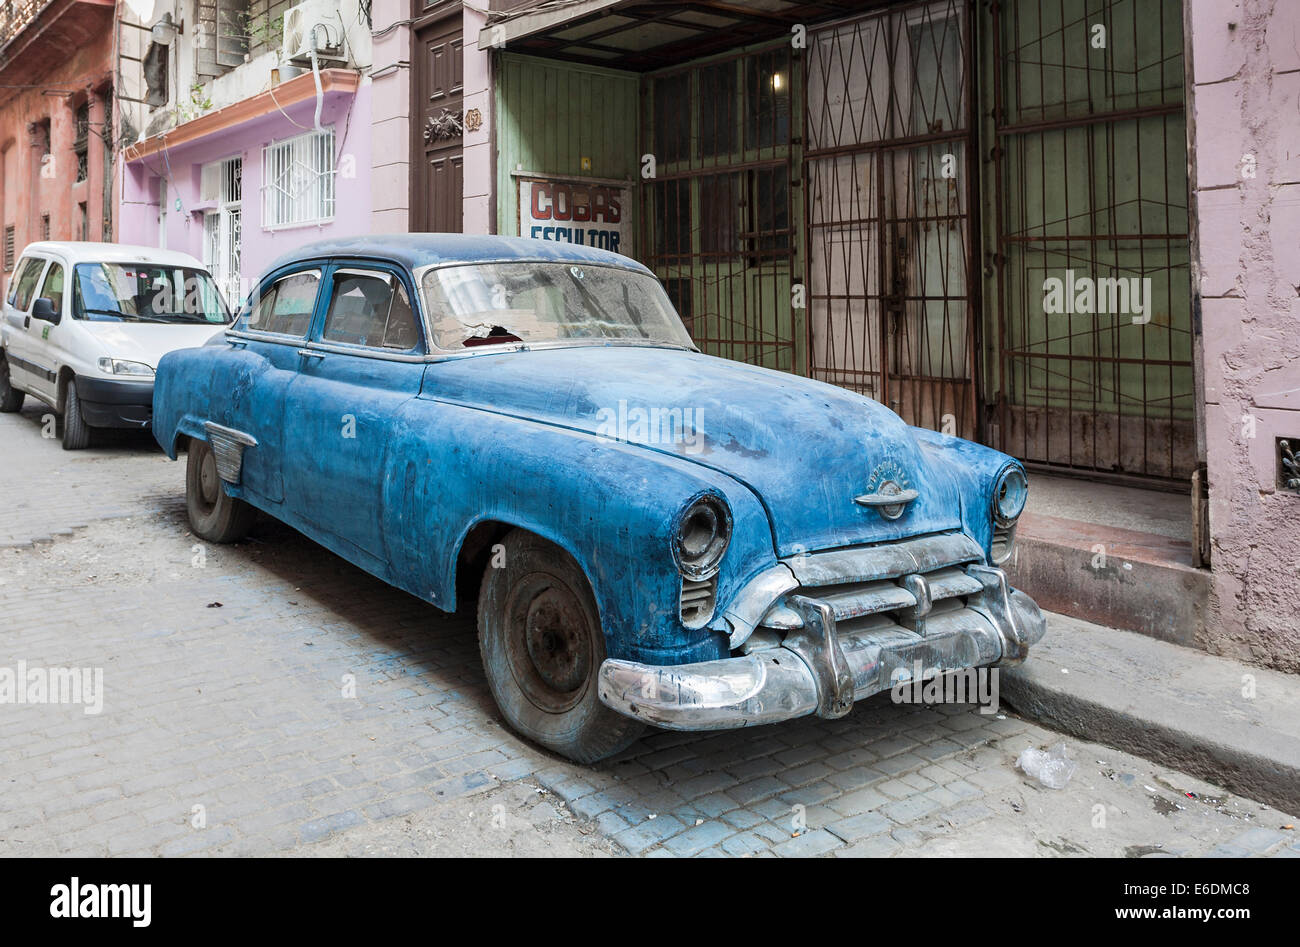 Dilapidated blue vintage Oldsmobile car with taped broken windscreen parked on the roadside in a street in central Havana, Cuba Stock Photo